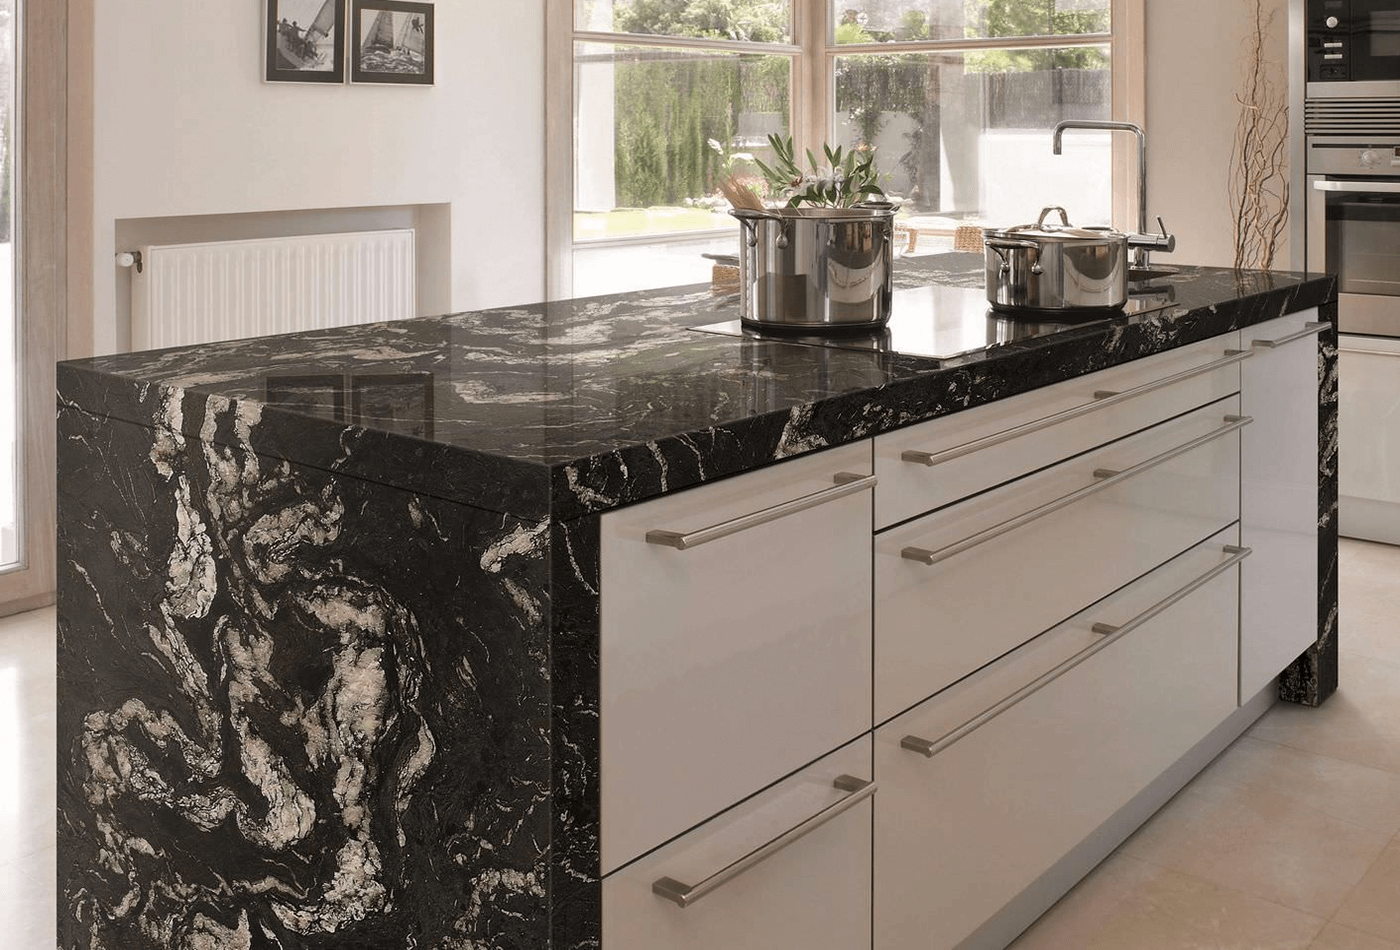 Cosmic Black Granite; Pick for Your Entire Home and Style It